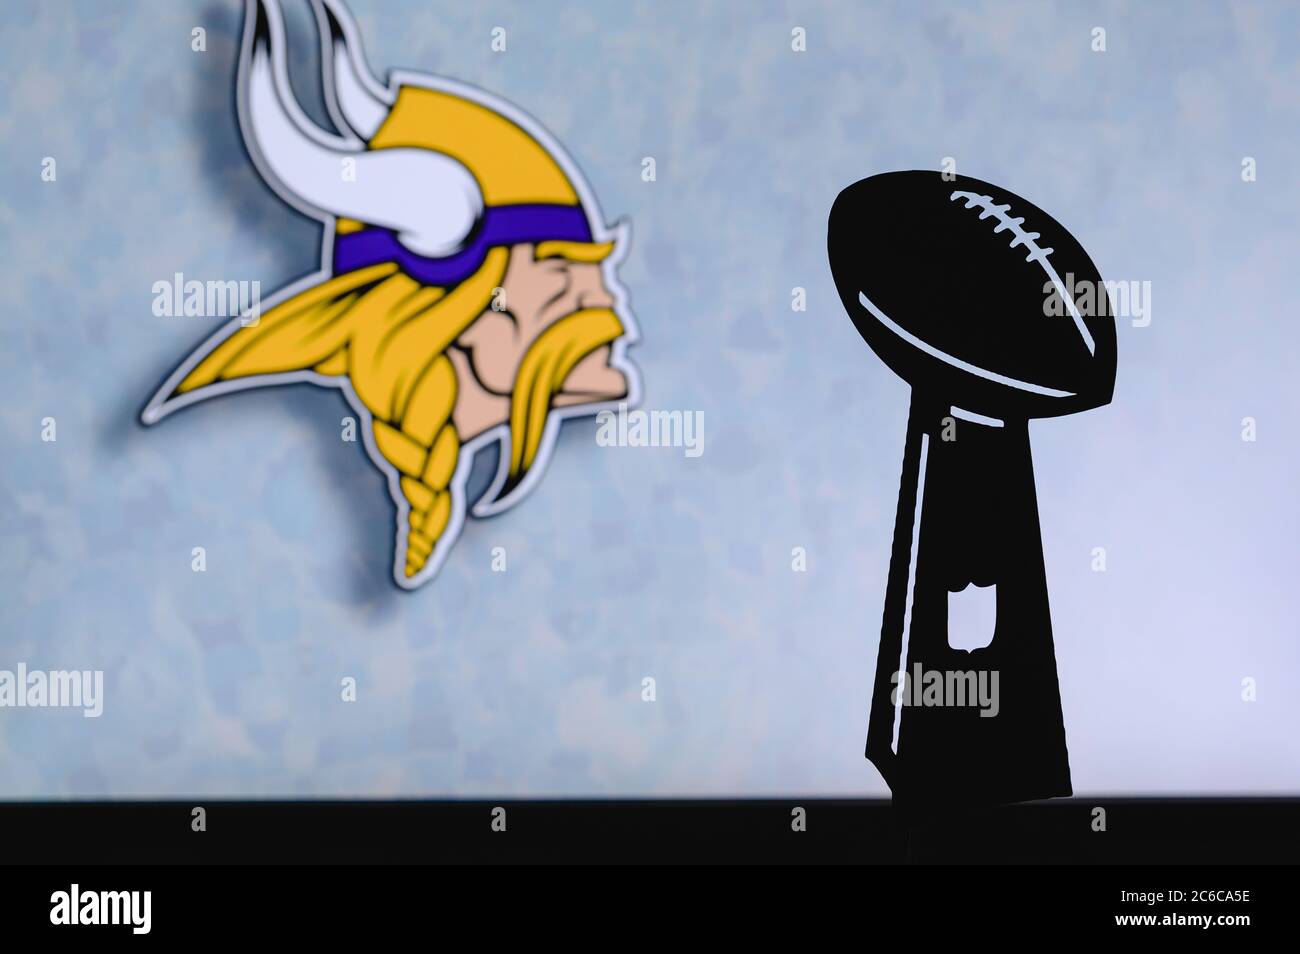 Minnesota Vikings professional american football club, silhouette of NFL  trophy, logo of the club in background Stock Photo - Alamy